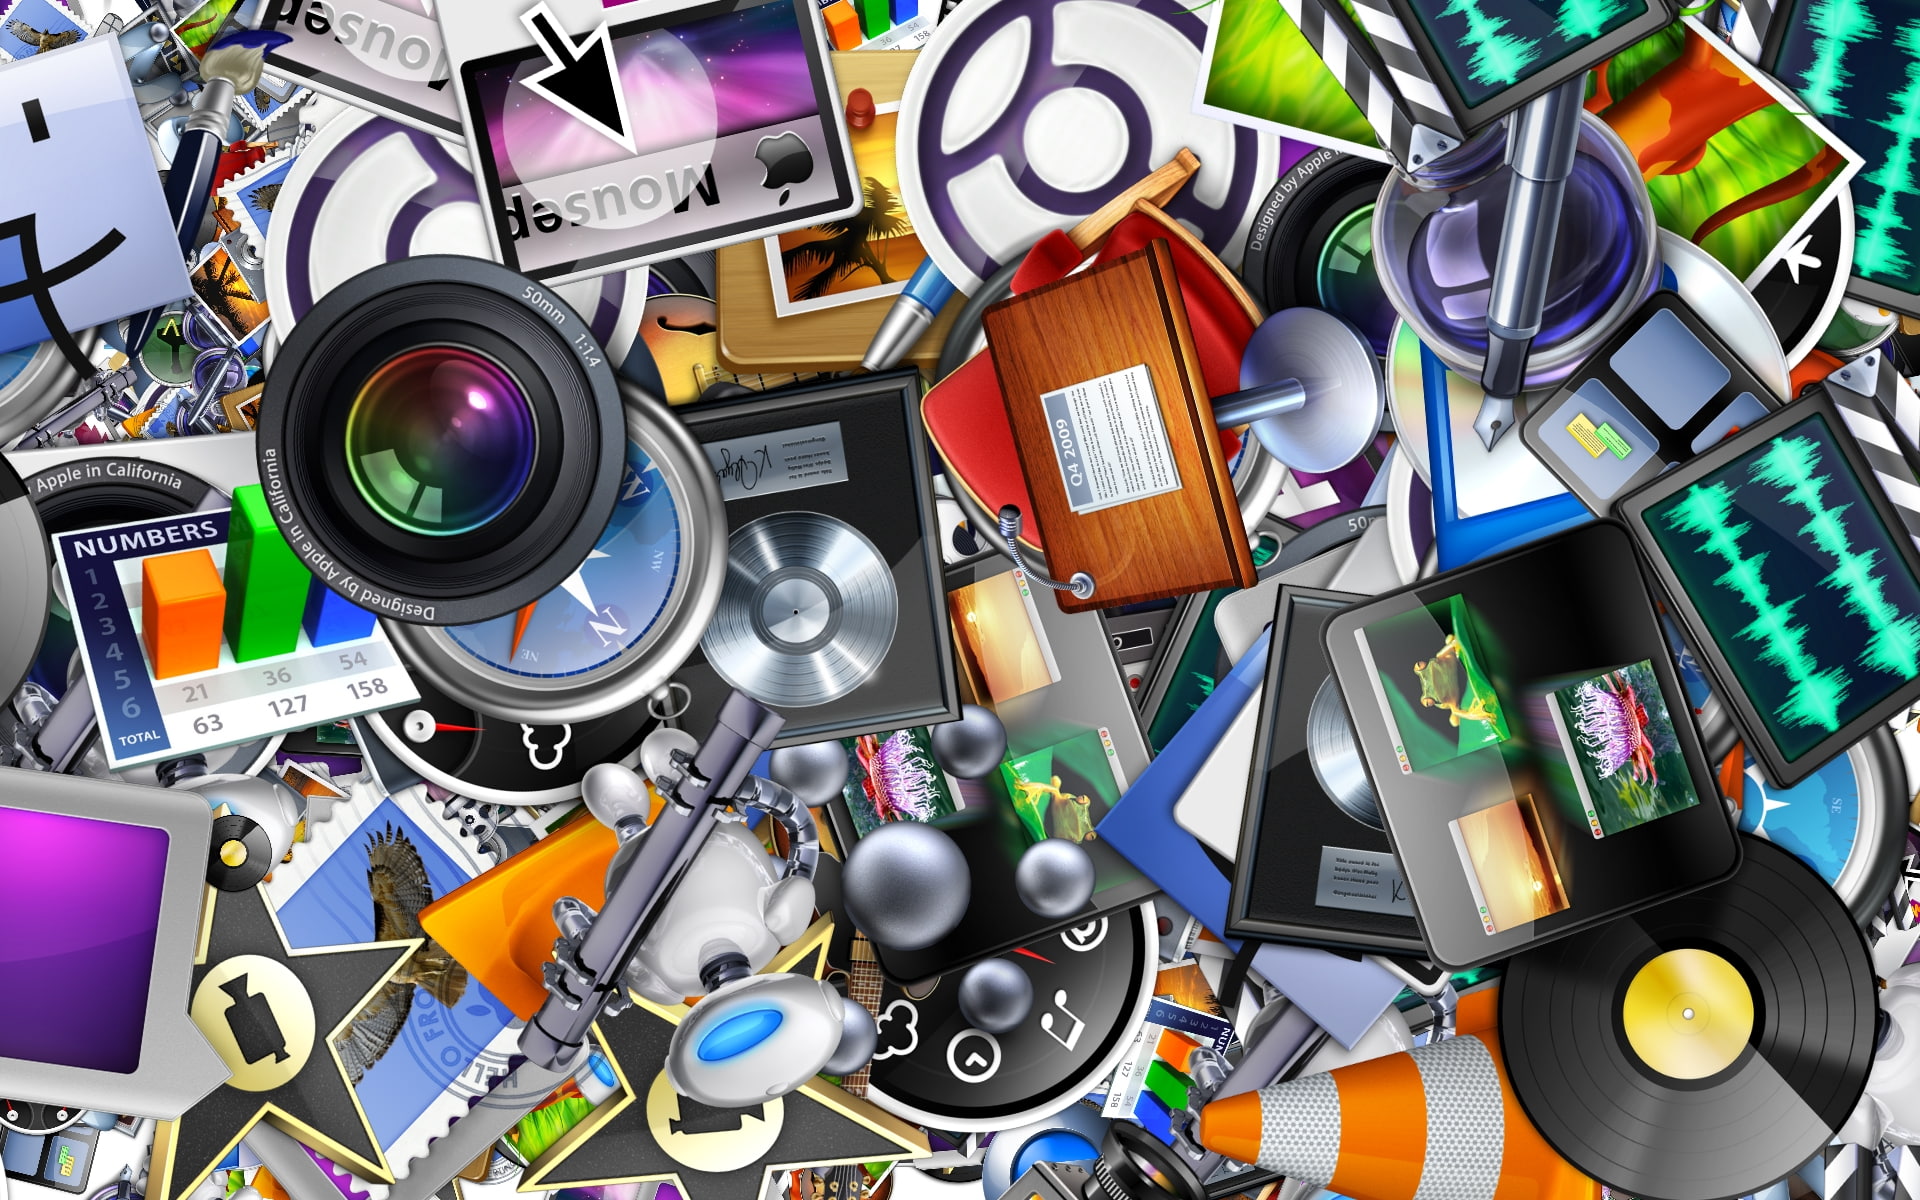 apple inc cameras operating systems collage apples icon apps Technology Apple HD Art